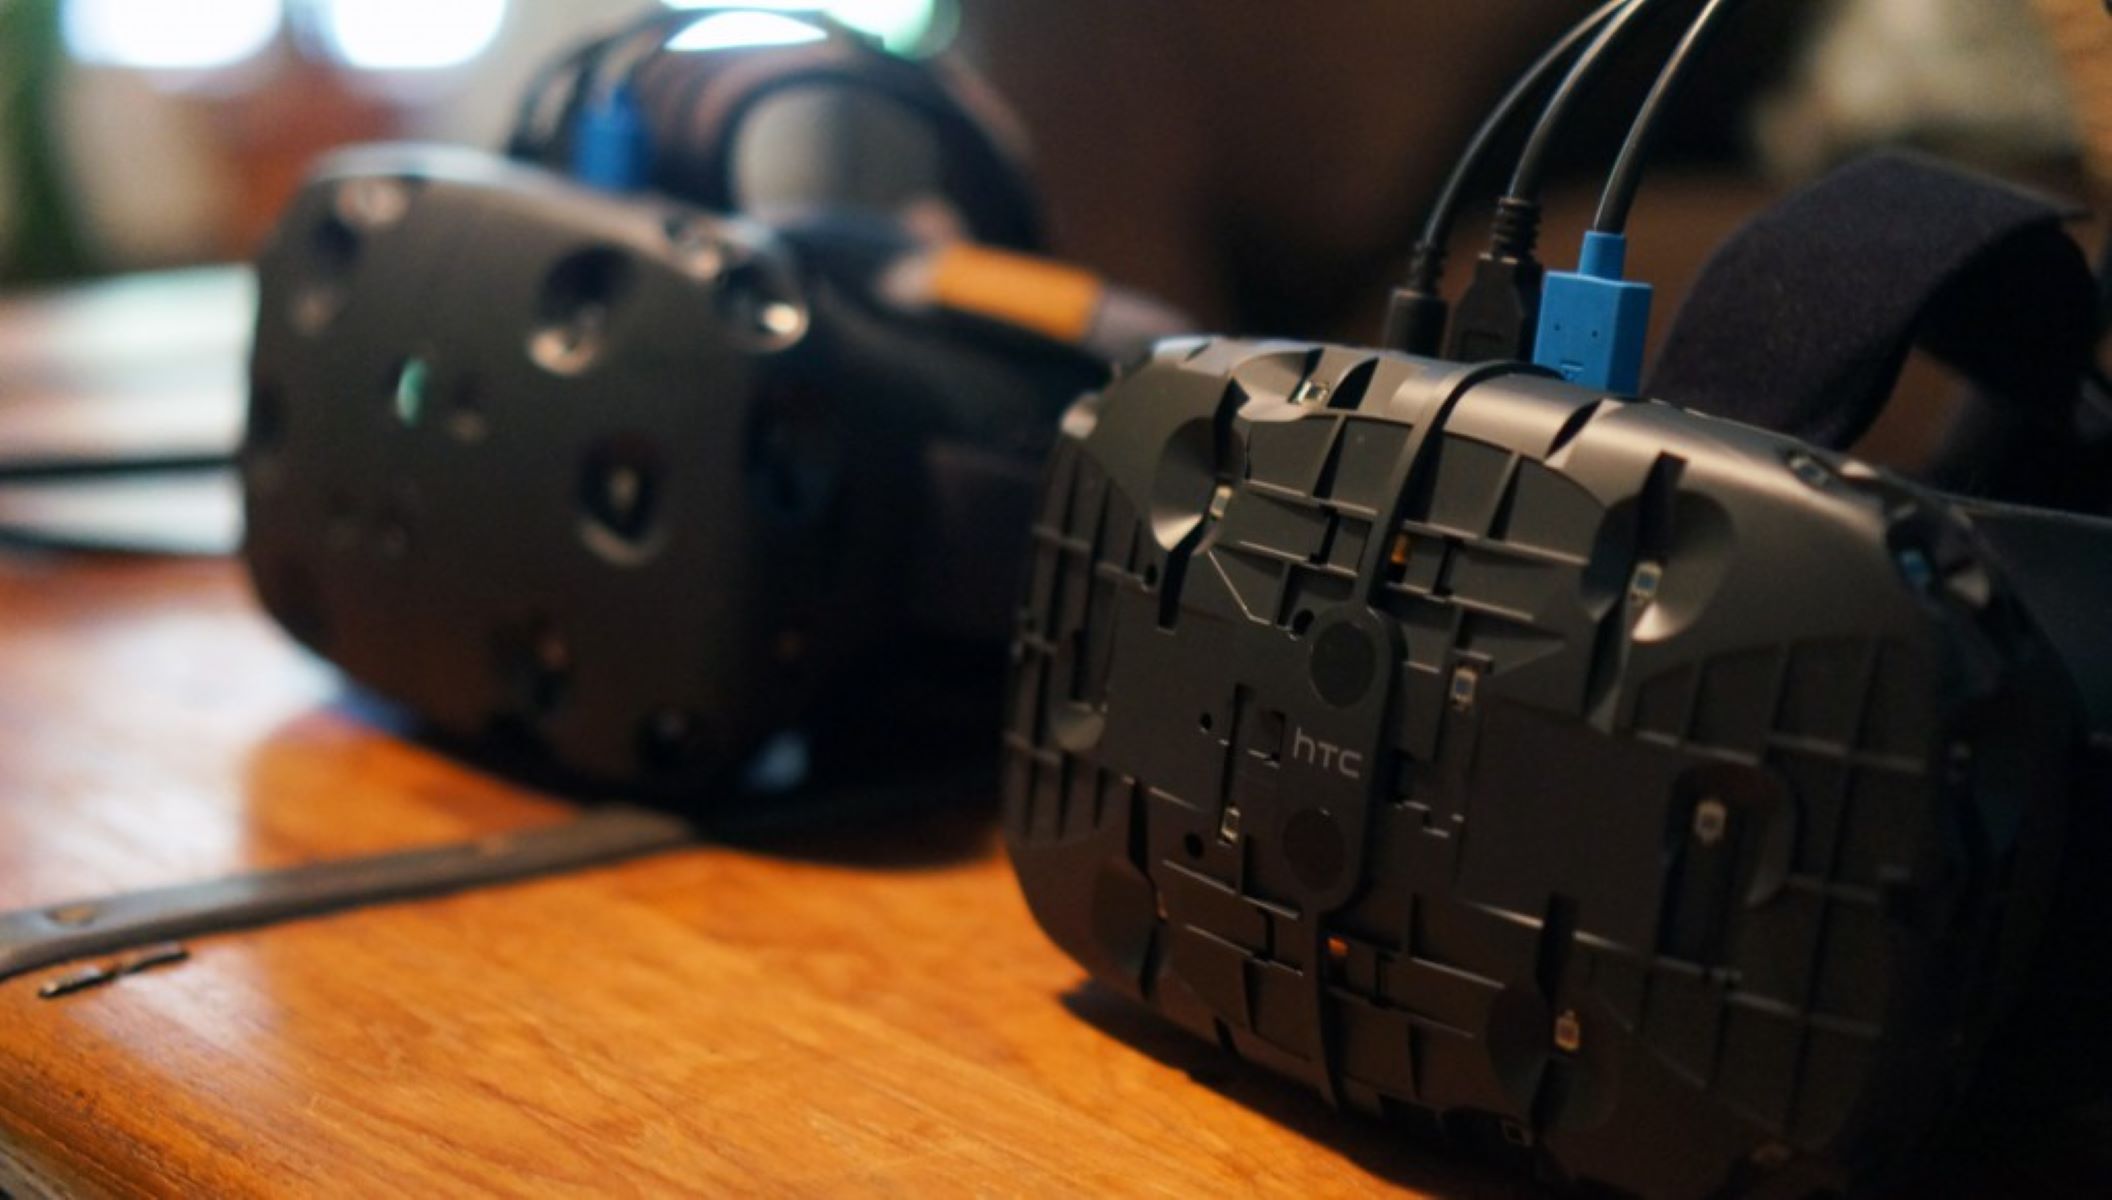 How To Start Developing For HTC Vive